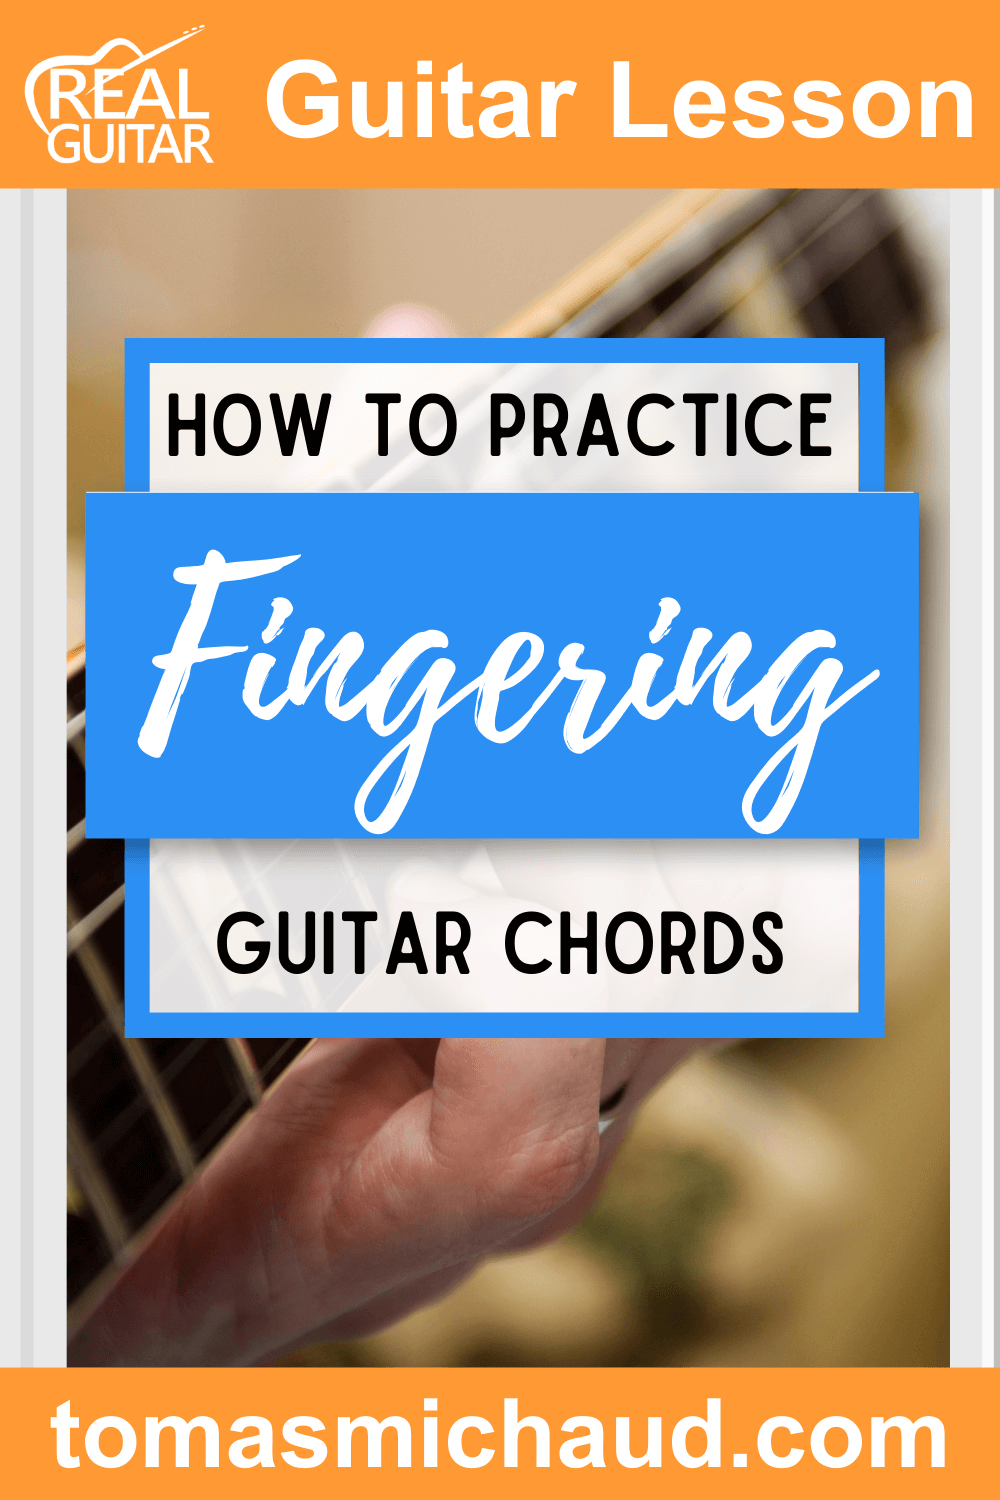 How to Practice Fingering Guitar Chords